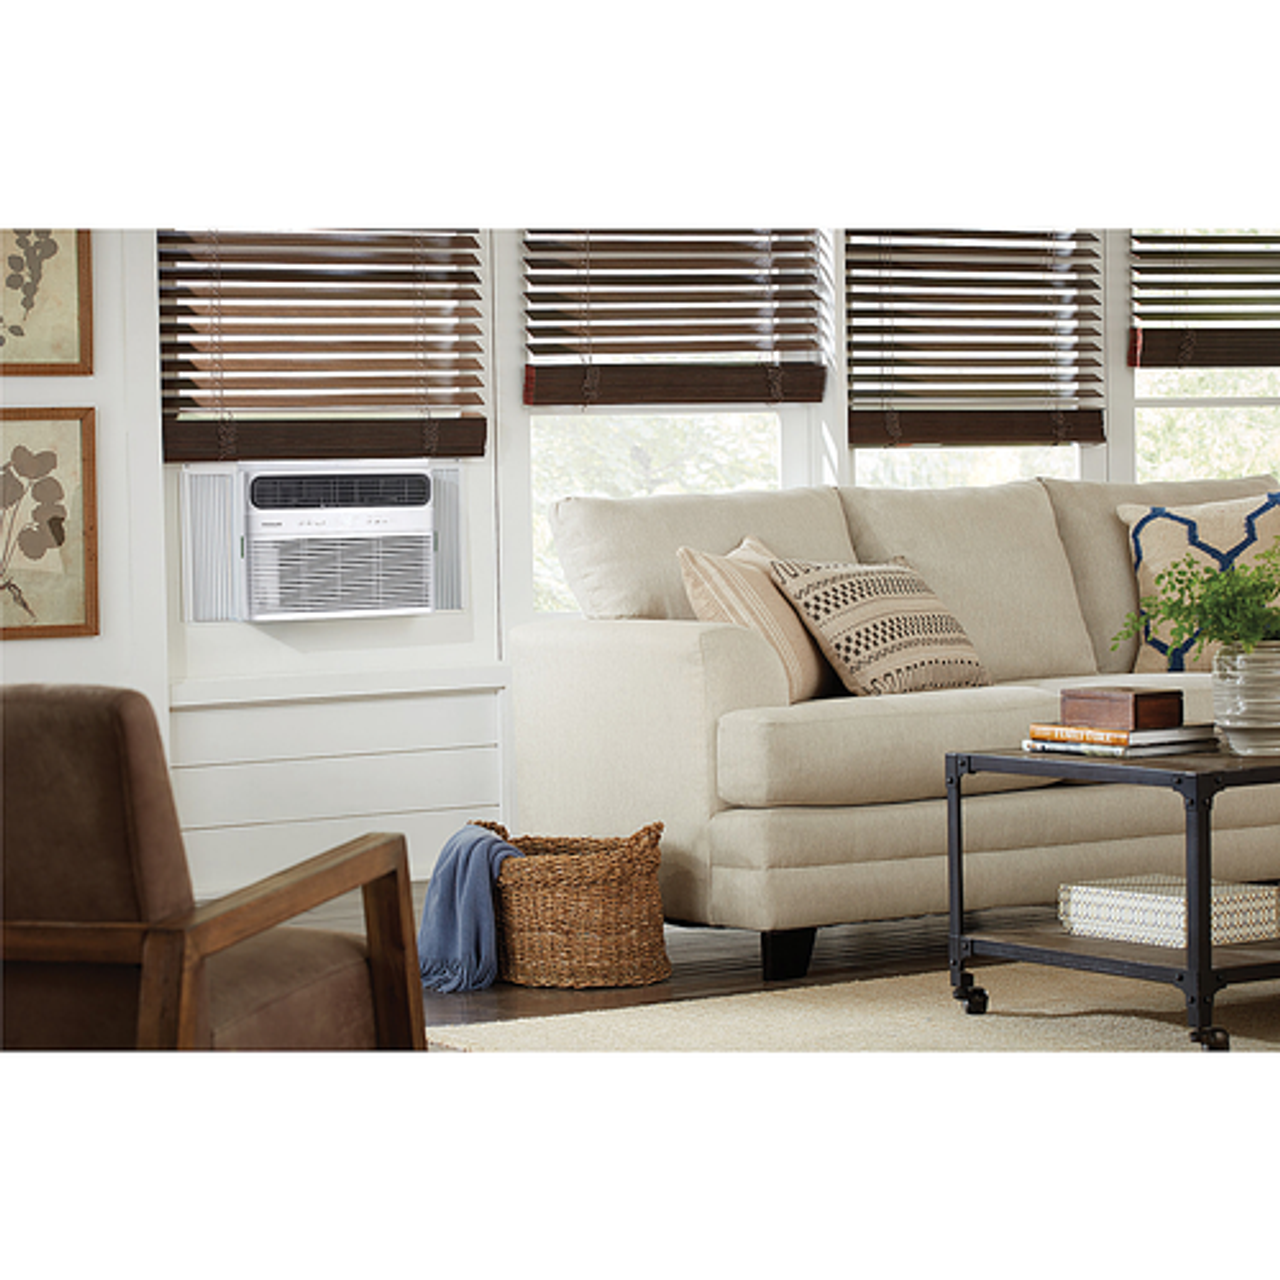 Frigidaire - 12,000 BTU Smart Window Air Conditioner with Wi-Fi and Remote in White - White